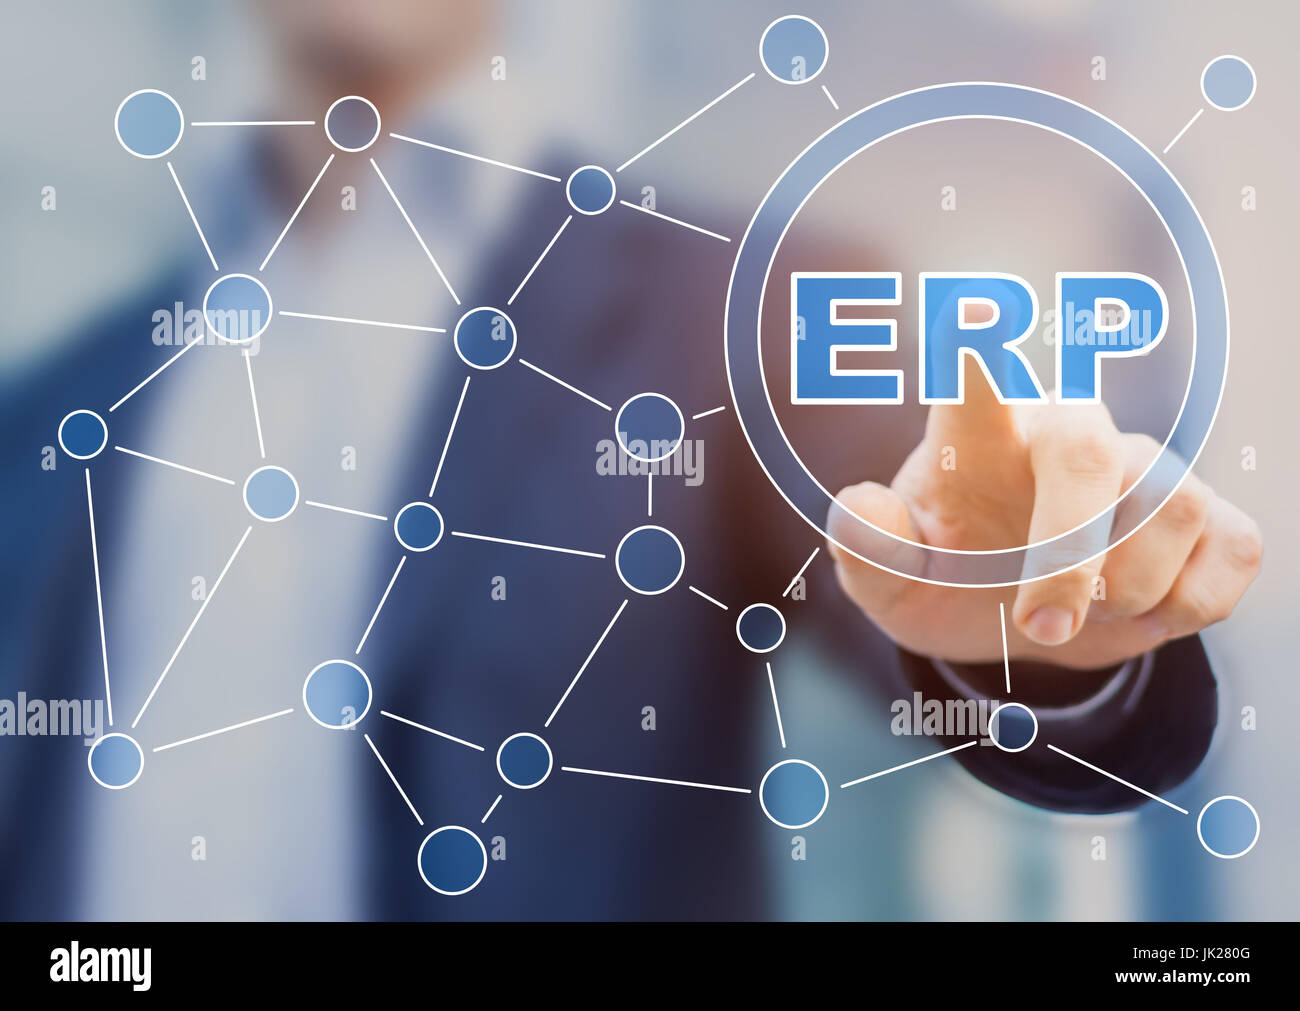 Manager touching Enterprise Resource Planing (ERP) button on a digital screen interface with connections symbolizing connected integrated services (pr Stock Photo